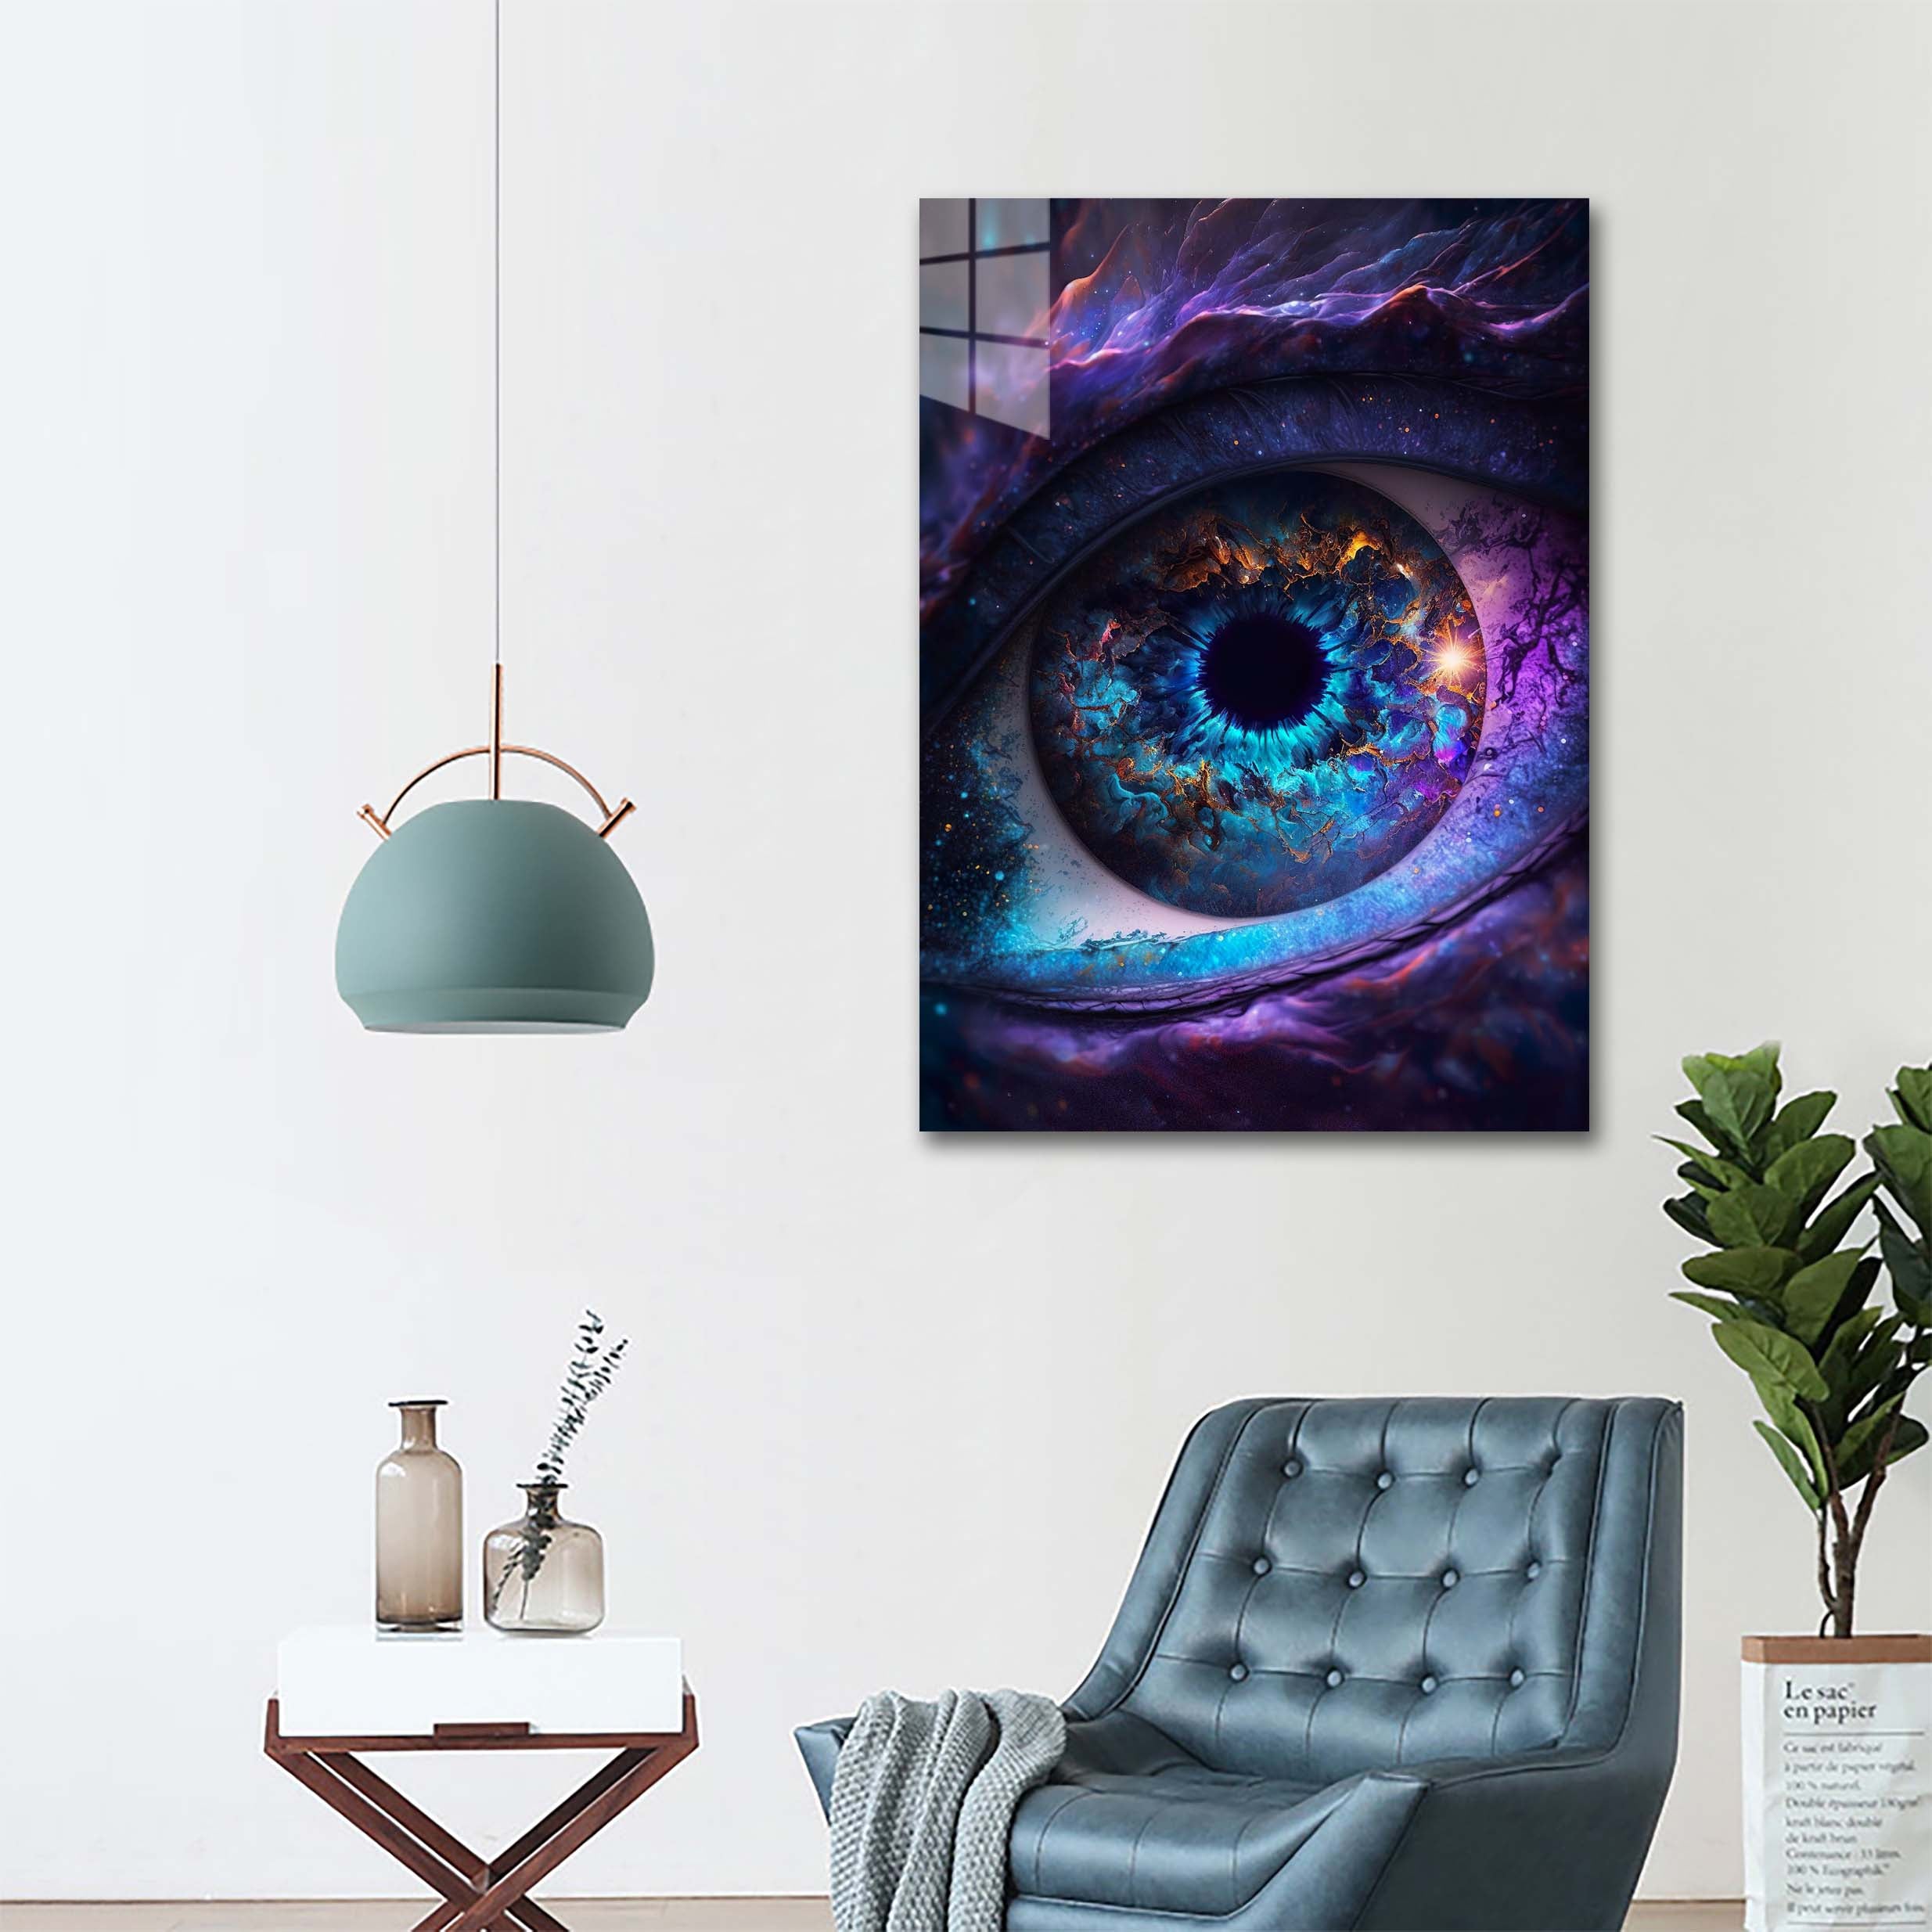 Eye of the Universe-designed by @Paragy